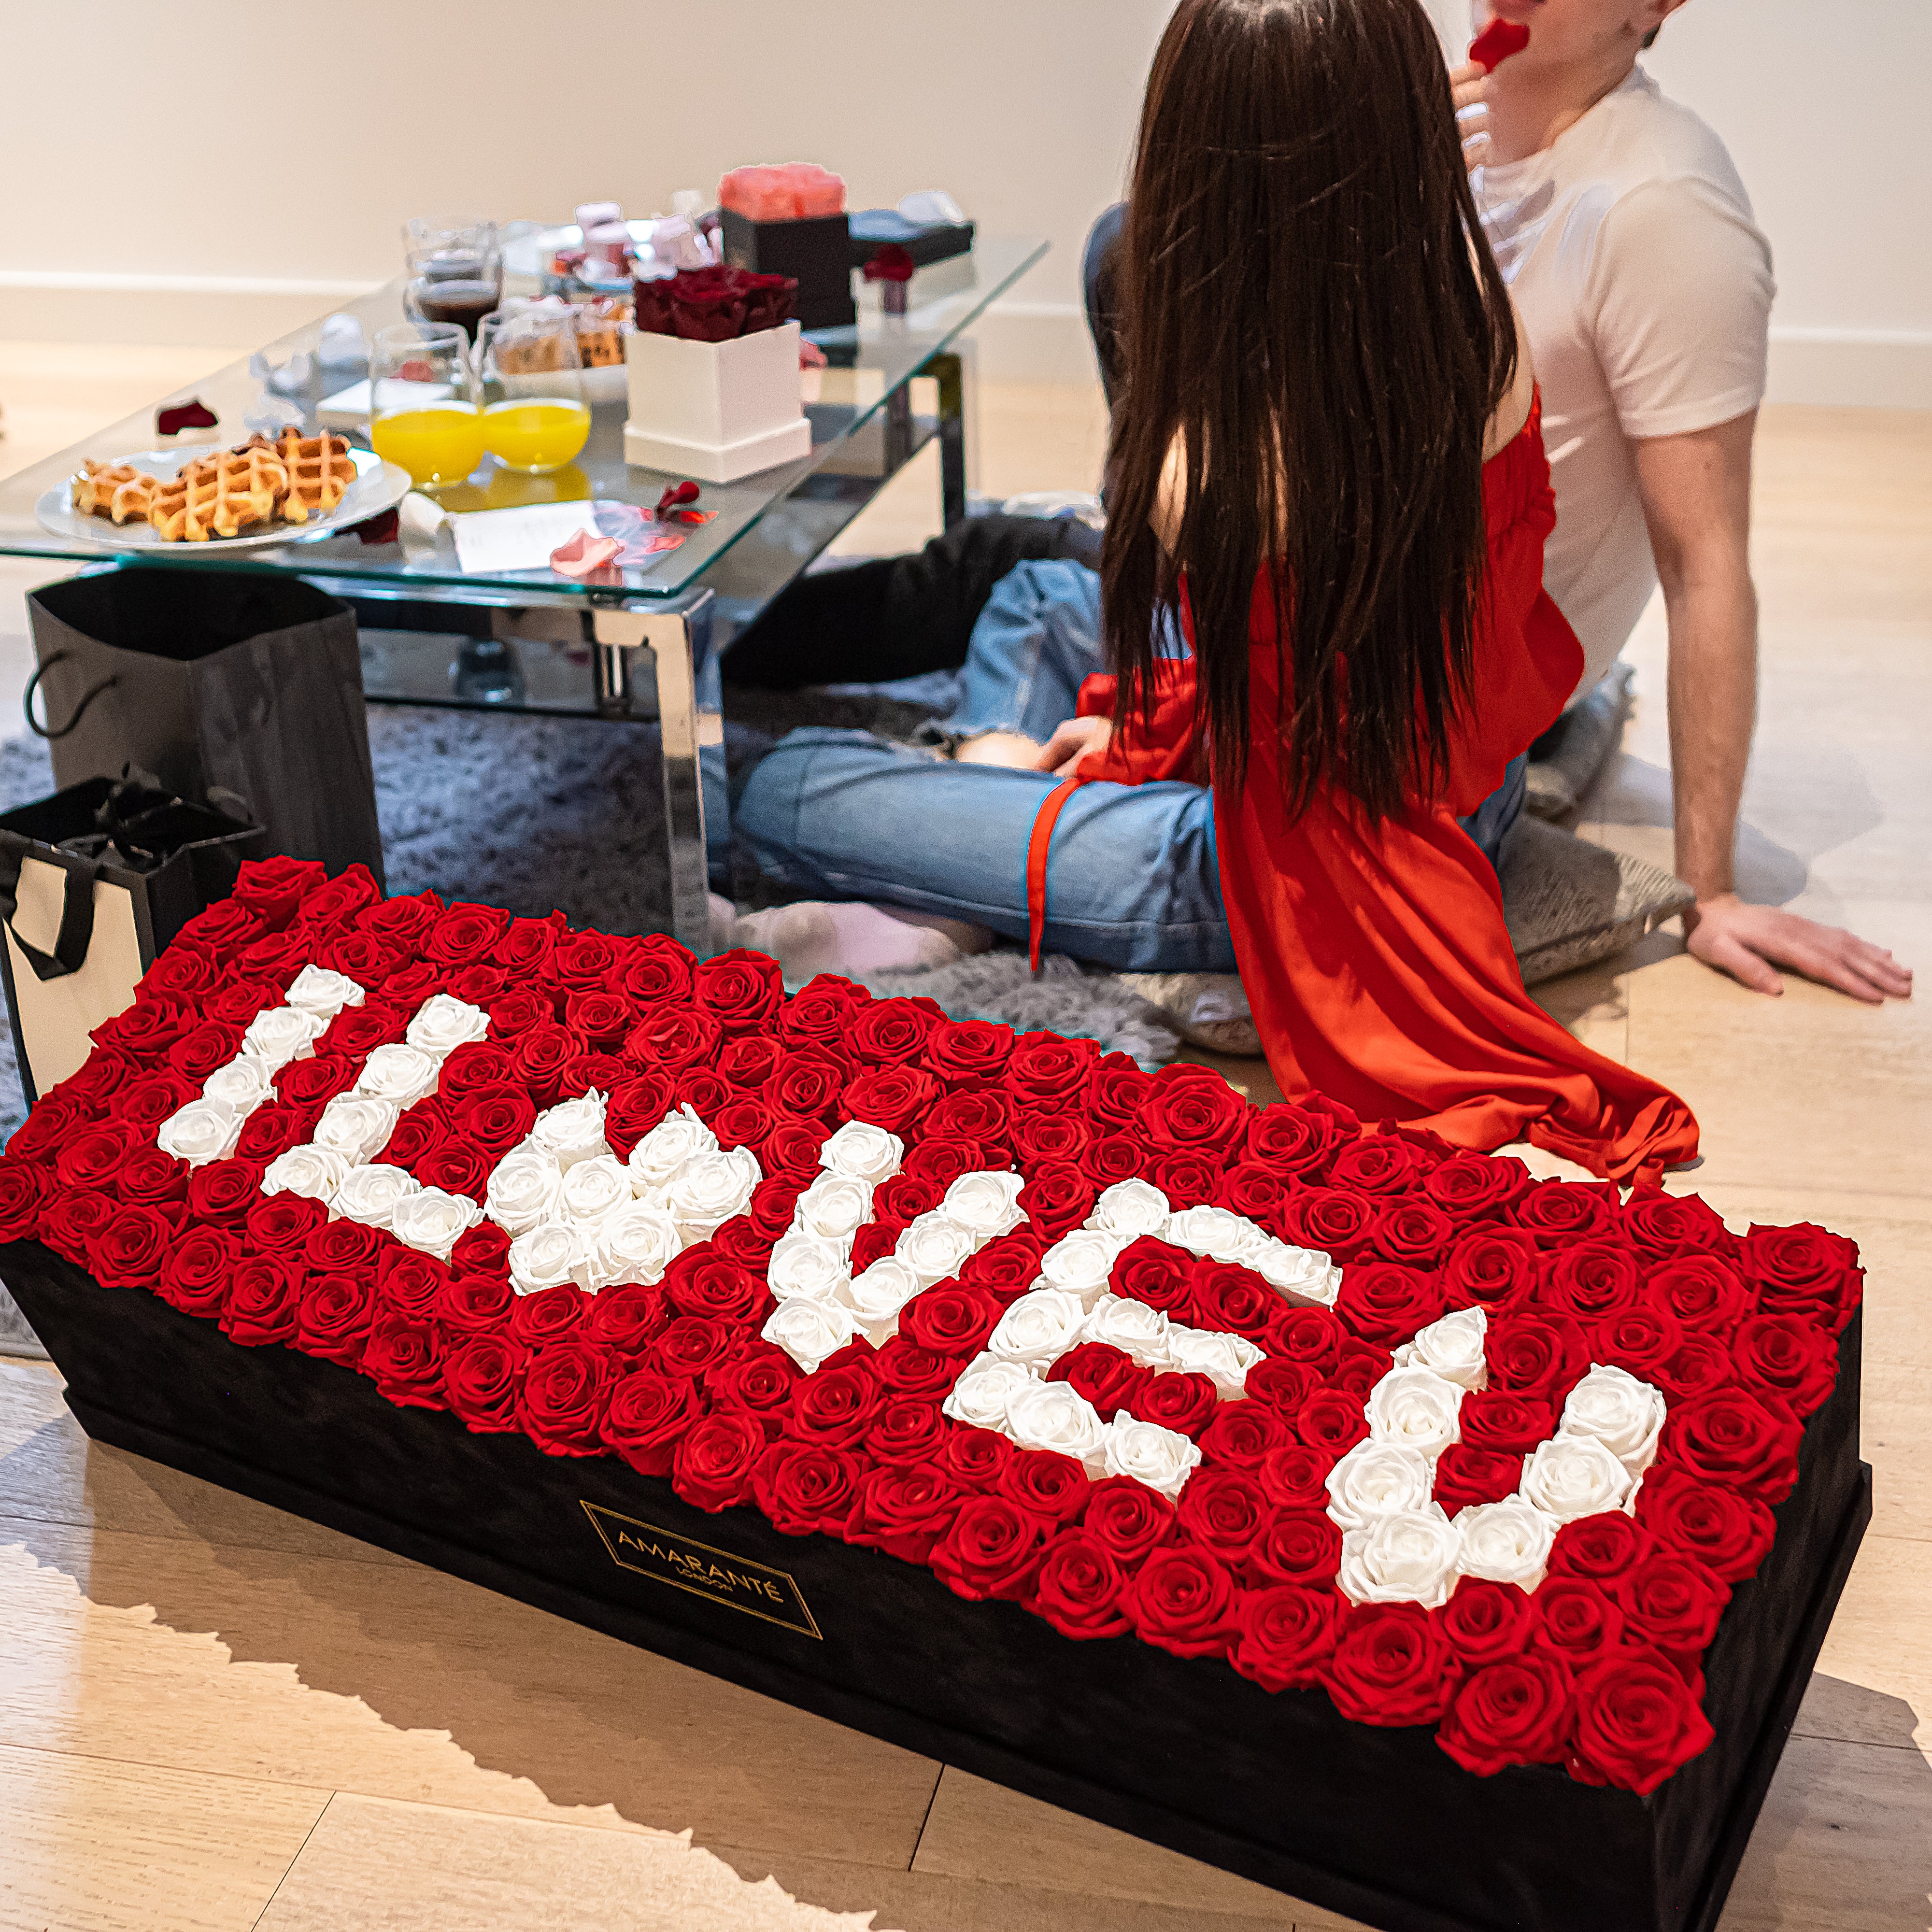 Captivating super deluxe black rectangular rose box, refined with a suede finish, housing 140 chic red and white infinity roses, symbolising enduring love with the phrase I LOVE YOU. Free UK delivery, Box size: 30"x25".